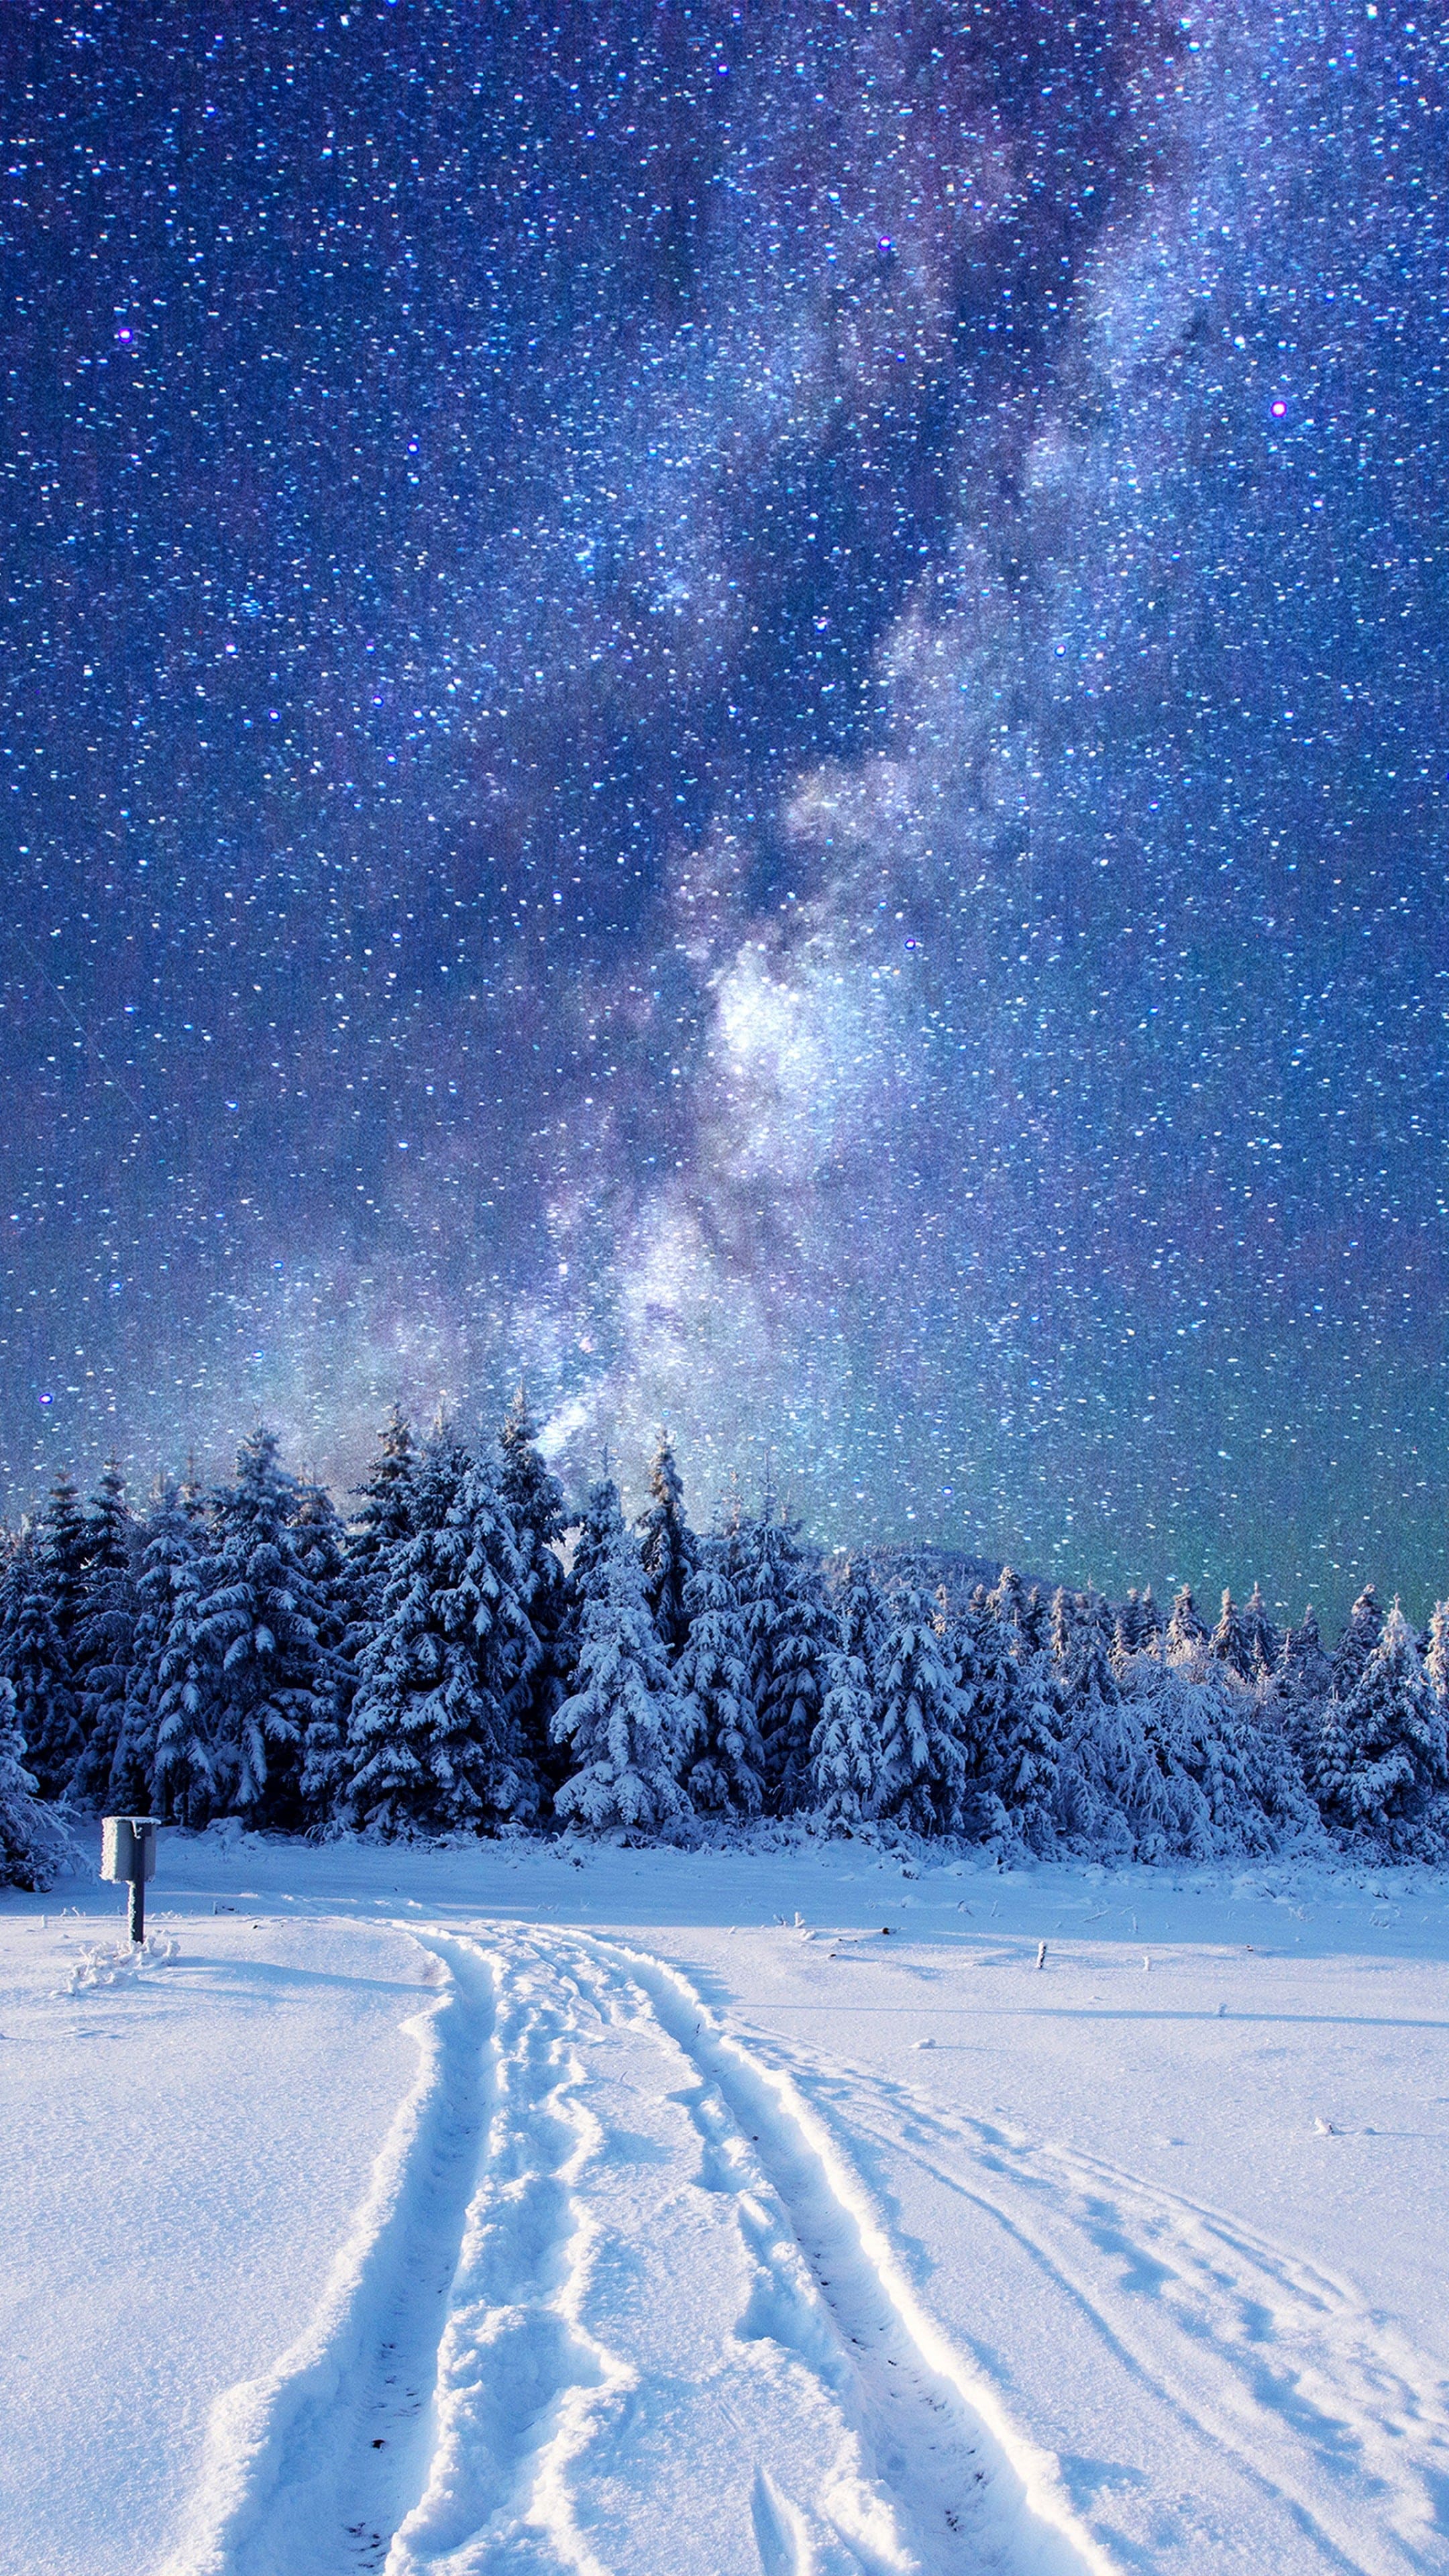 A starry sky over a snowy forest - Winter